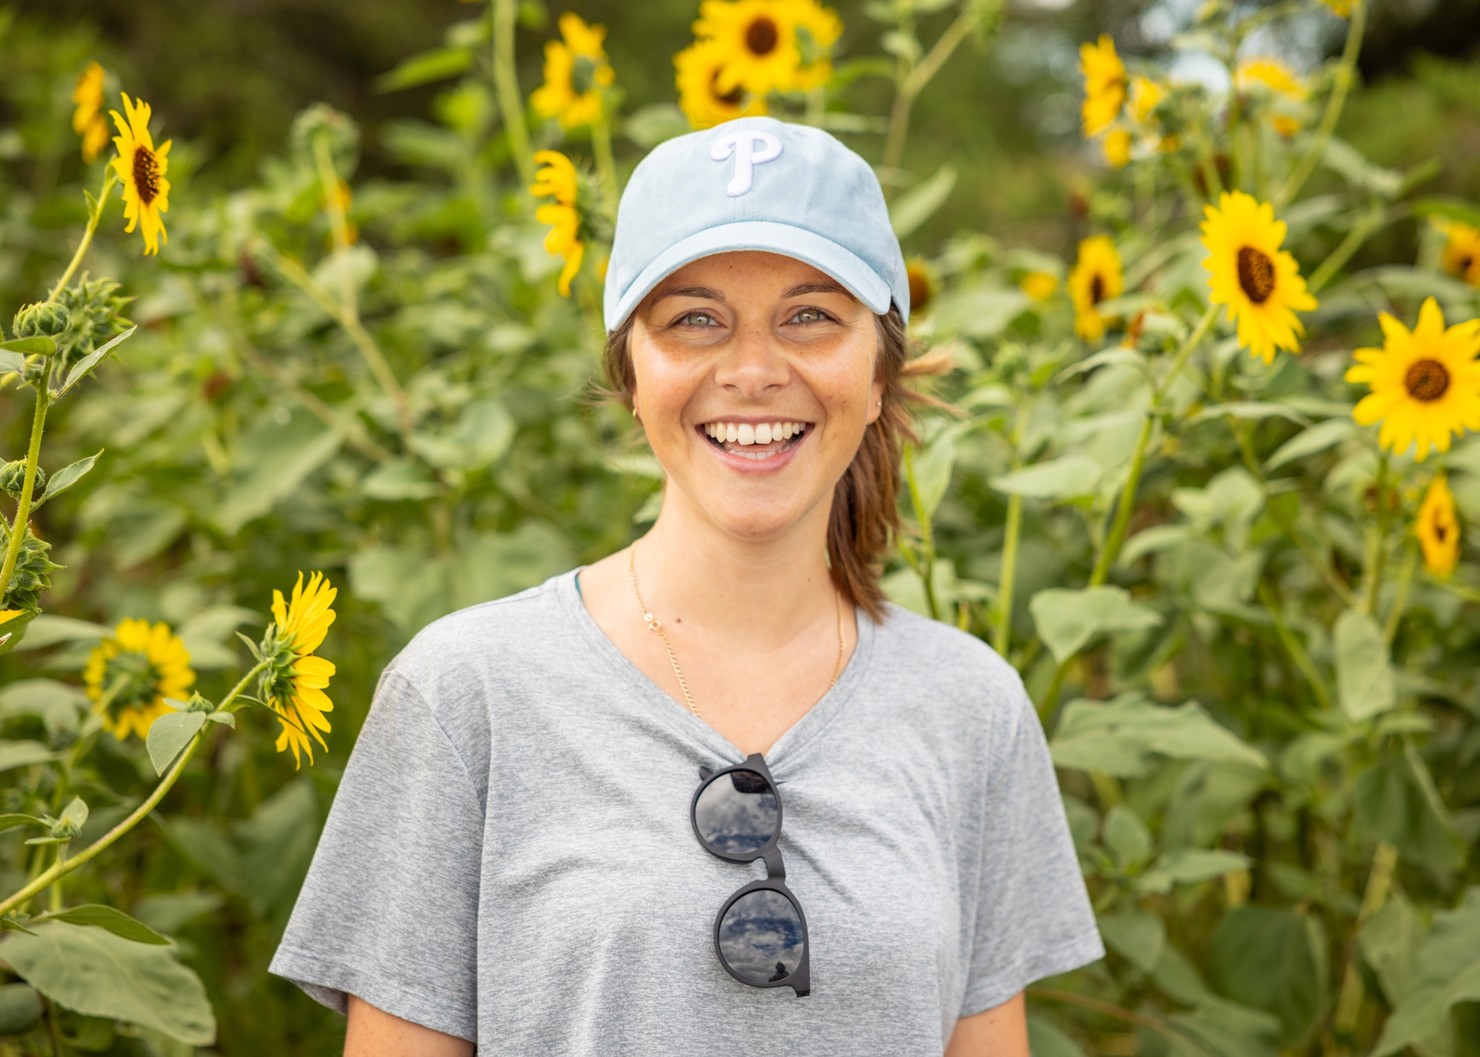 A woman smiling in front of a group of sunflowers.